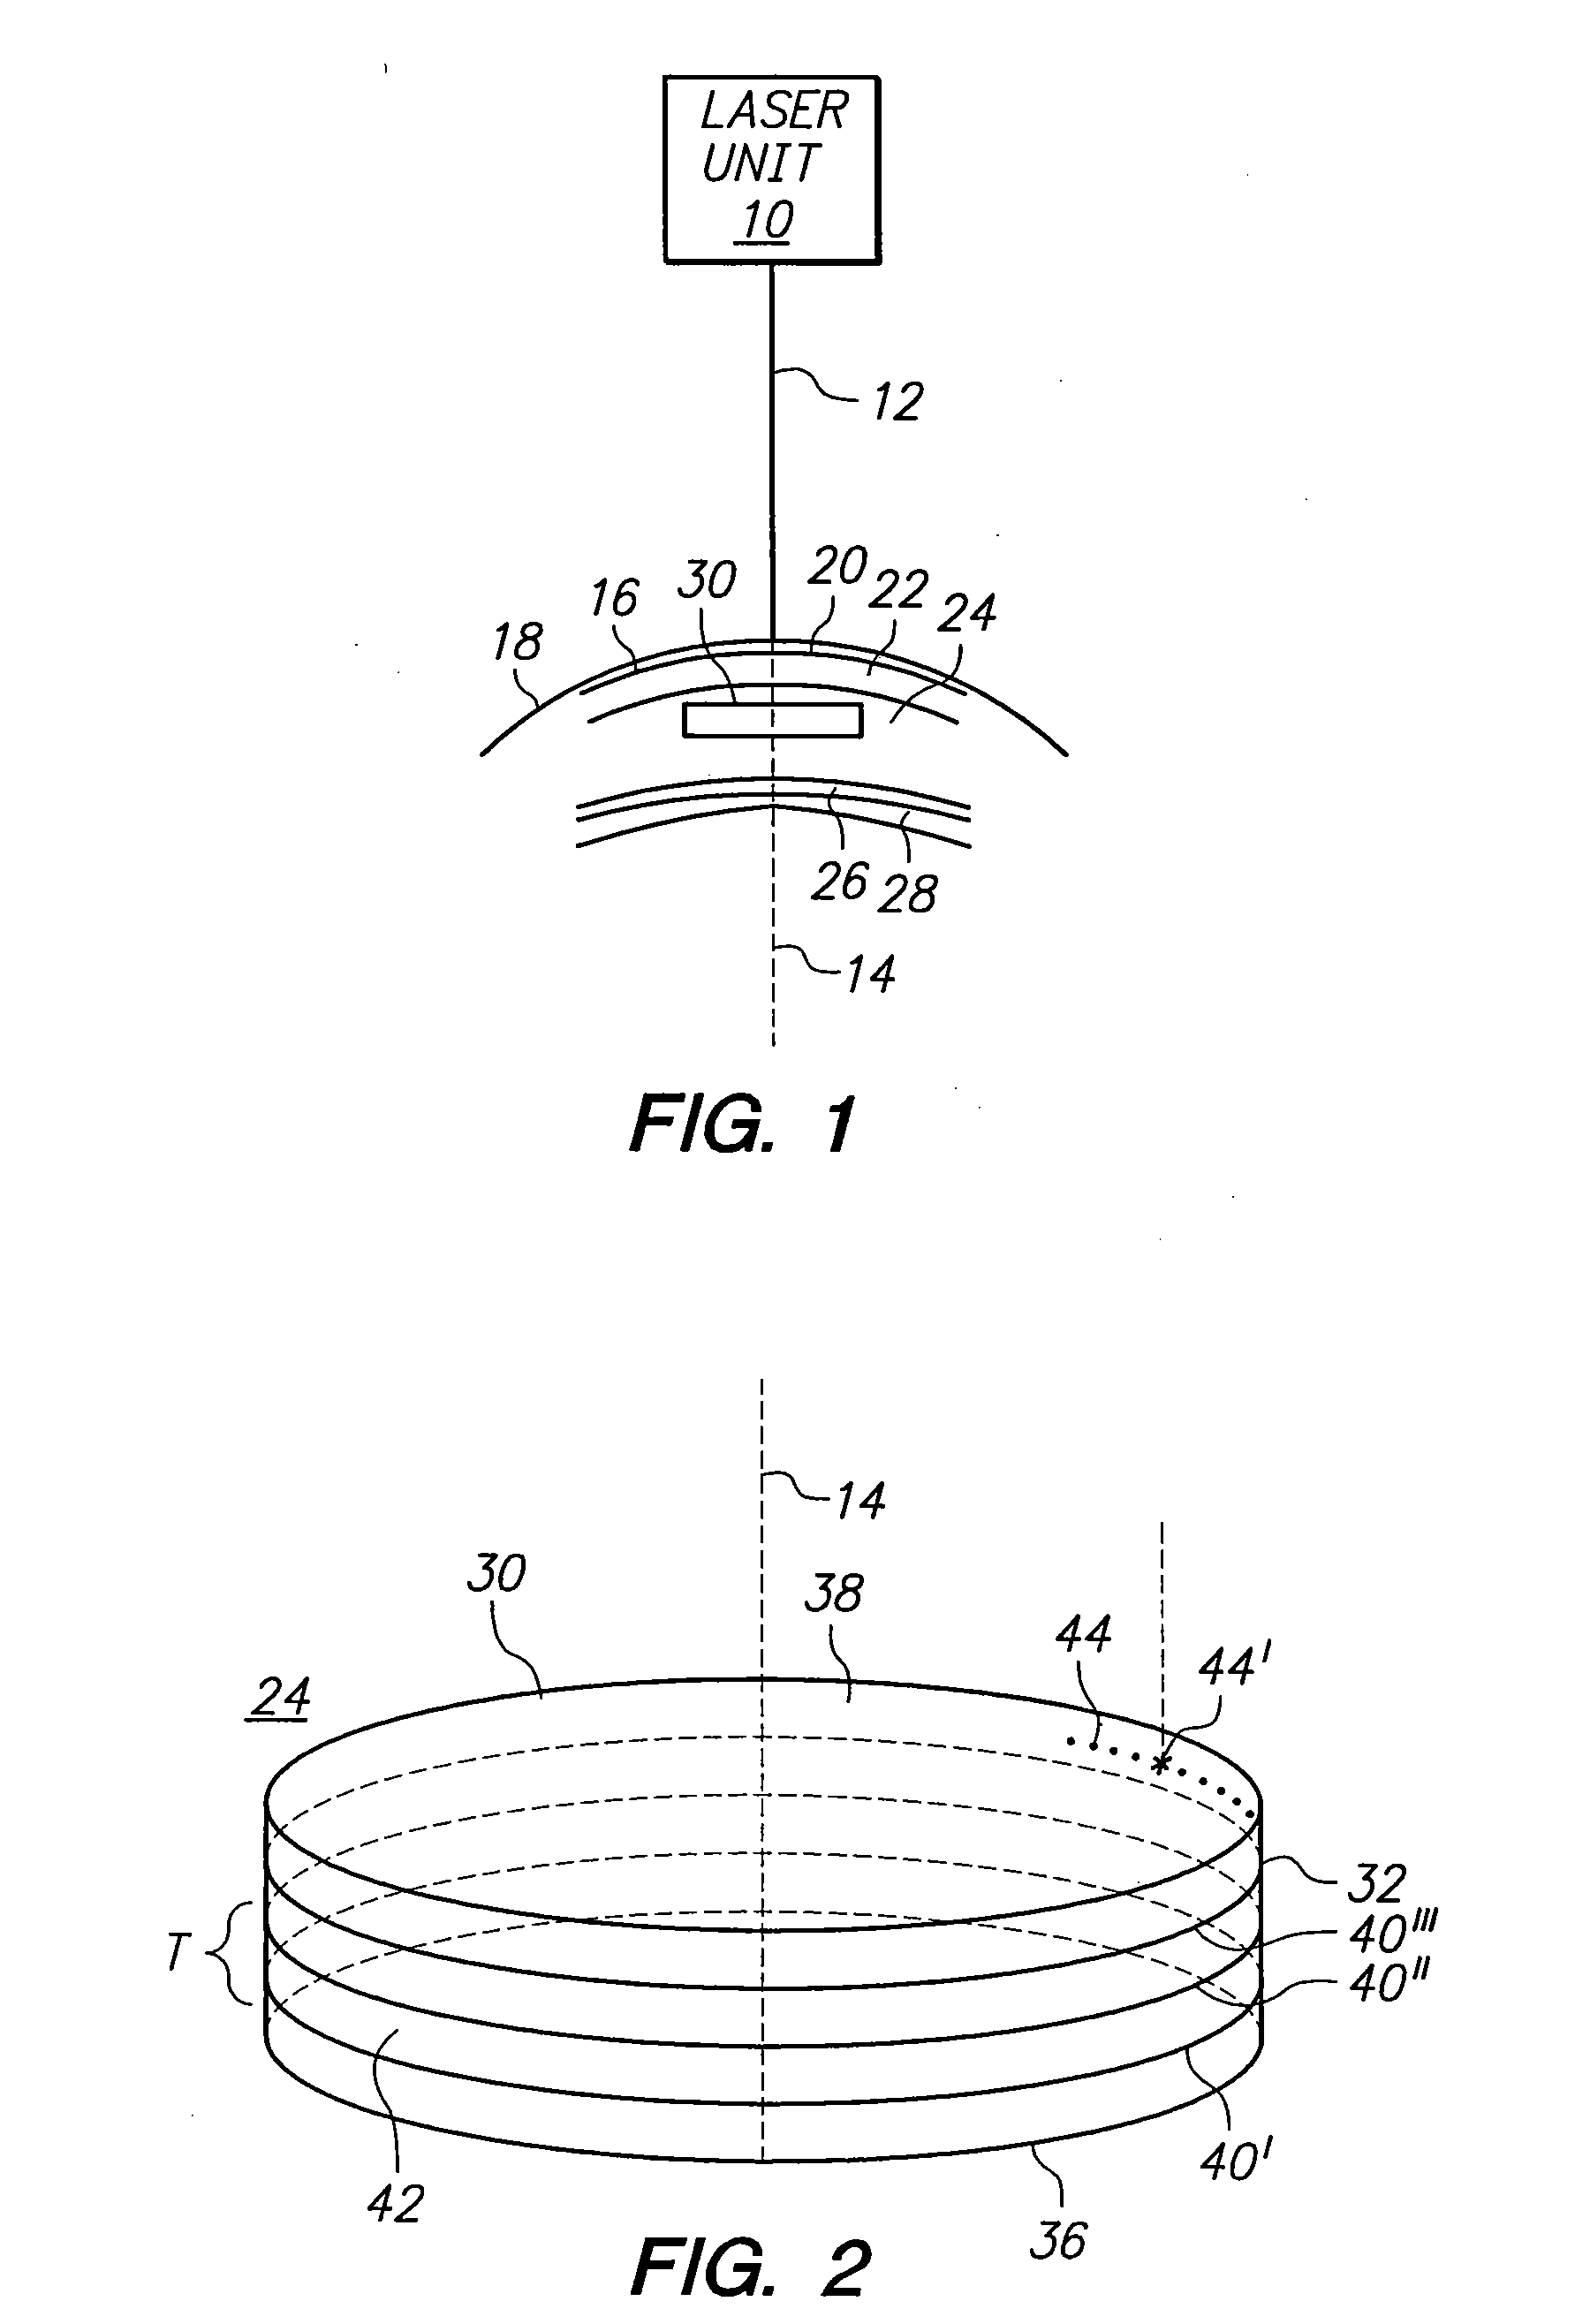 Method for harvesting corneal donor plugs for use in keratophakia procedures